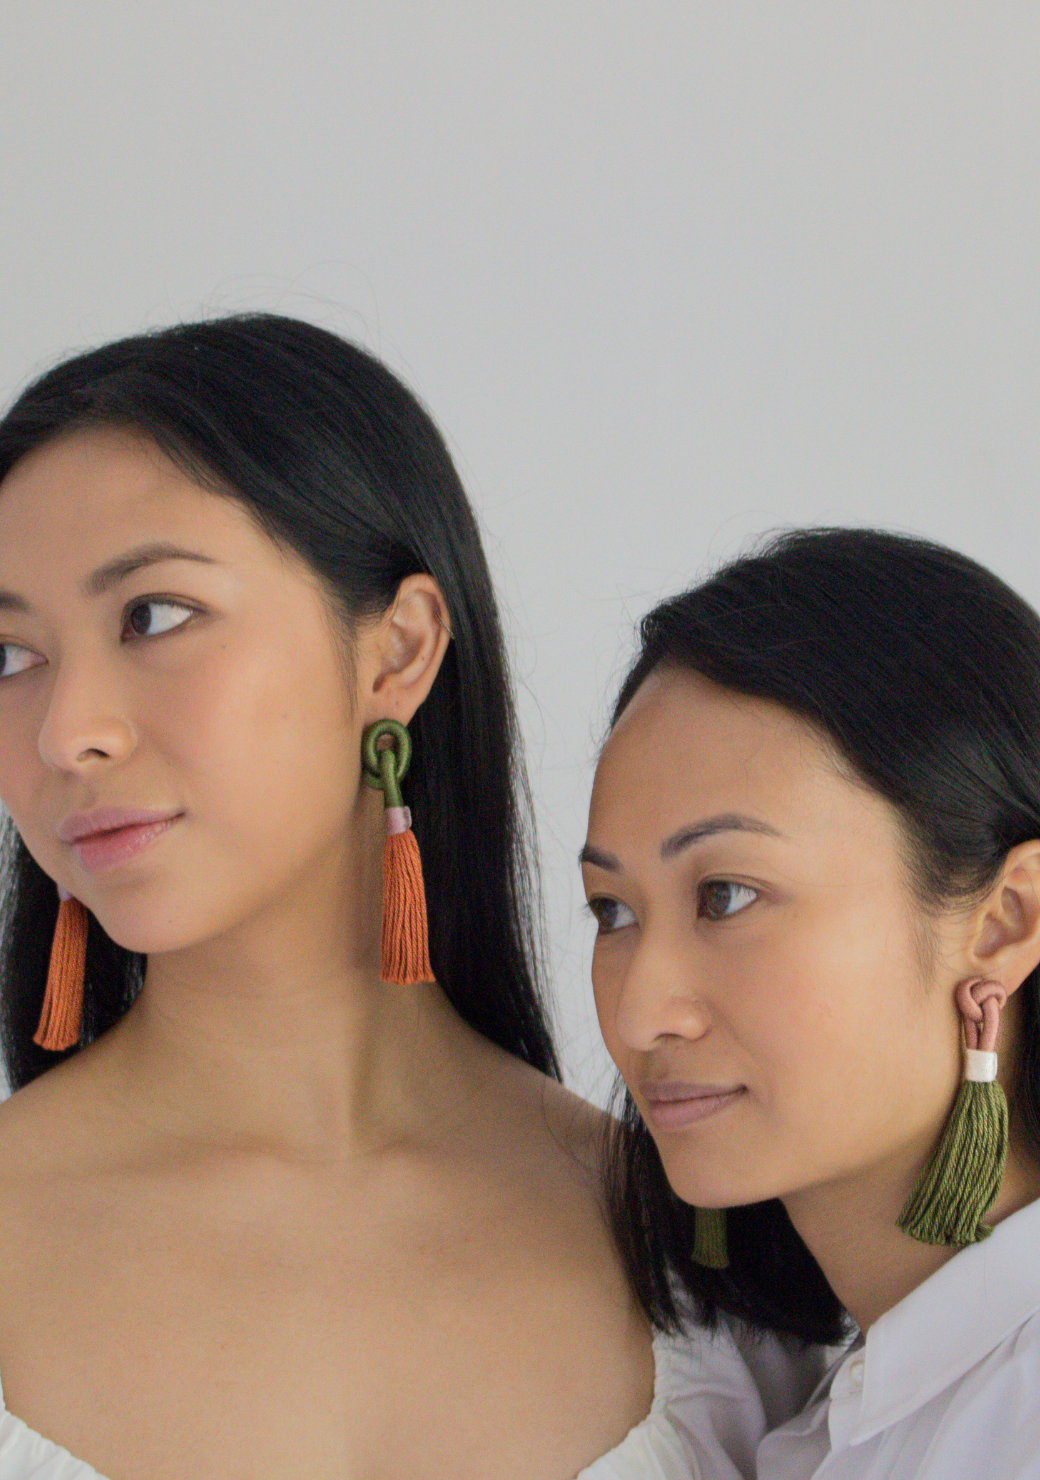 Rusa Knot Earrings in Hunter and Red Earth